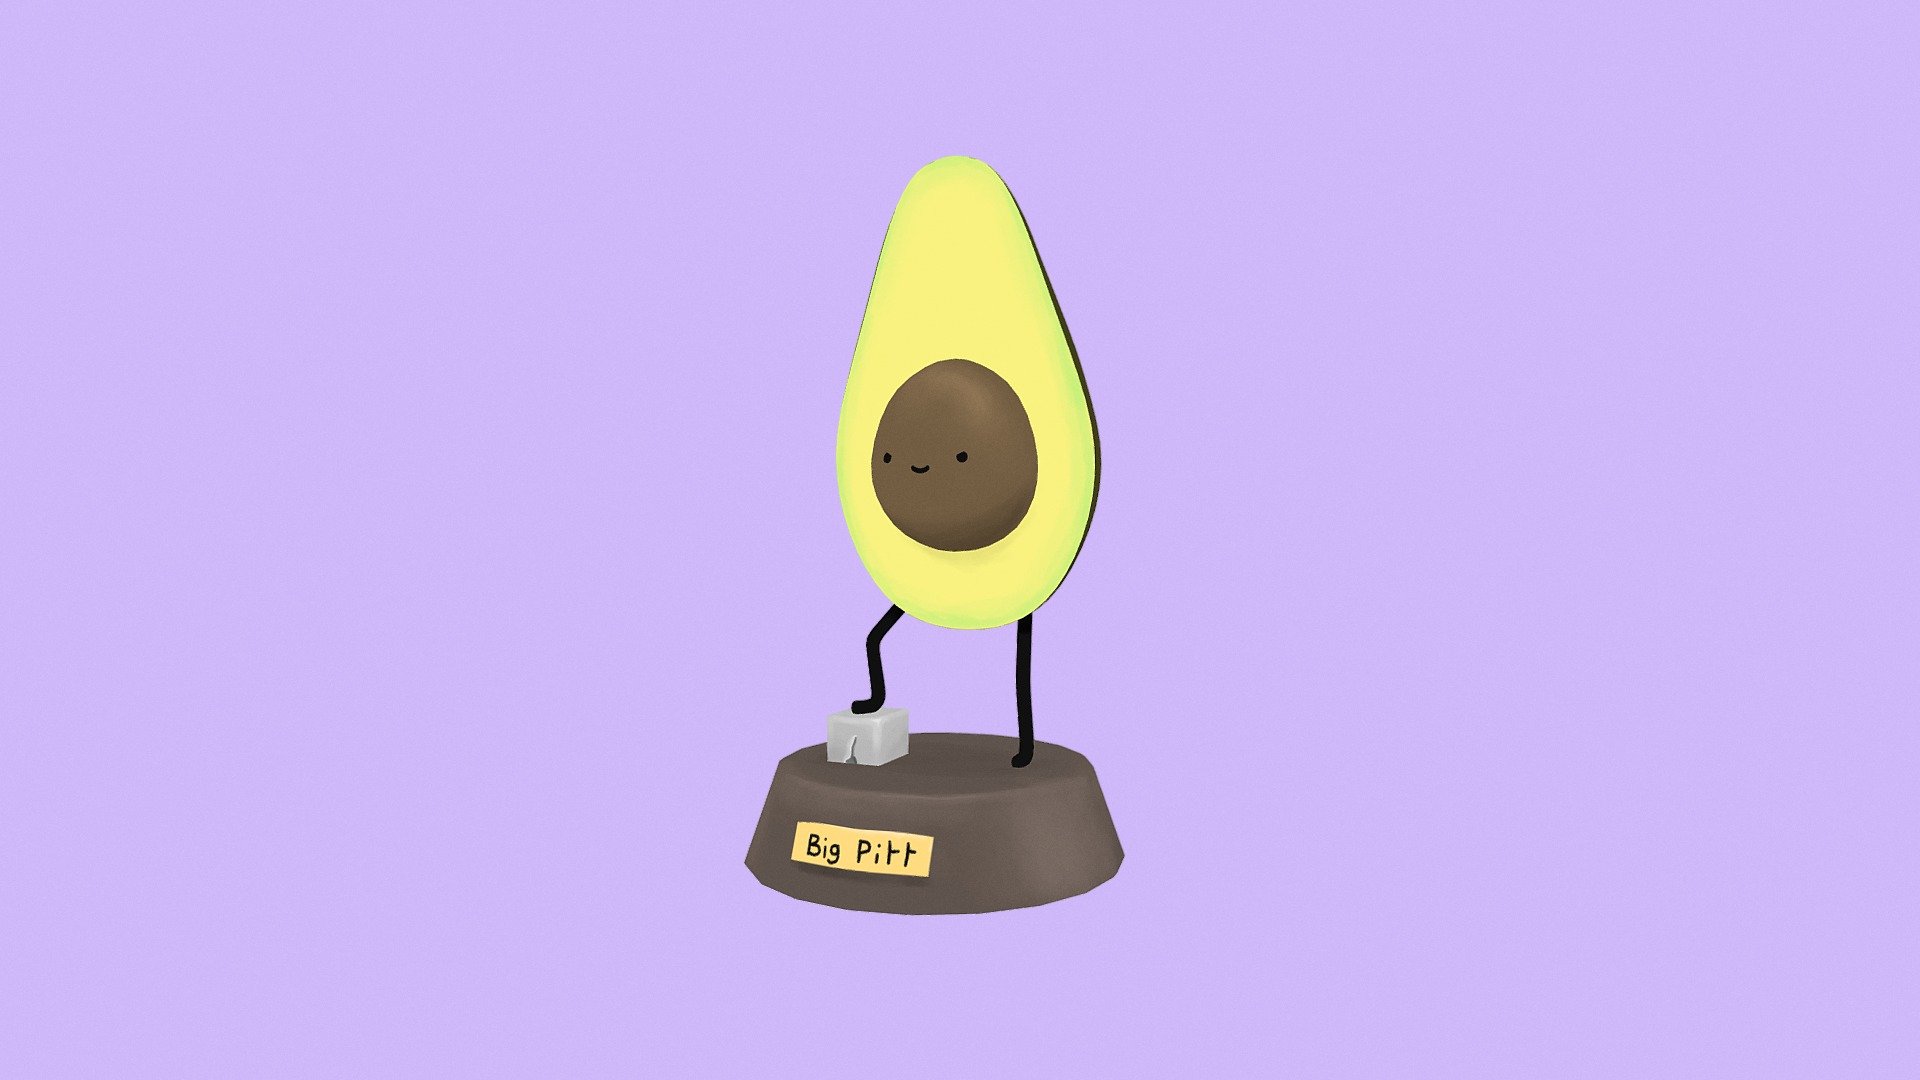 Here is Big Pitt Avocado, strong and fierce. This is an asset I modeled and textured for my graduation movie 3d model